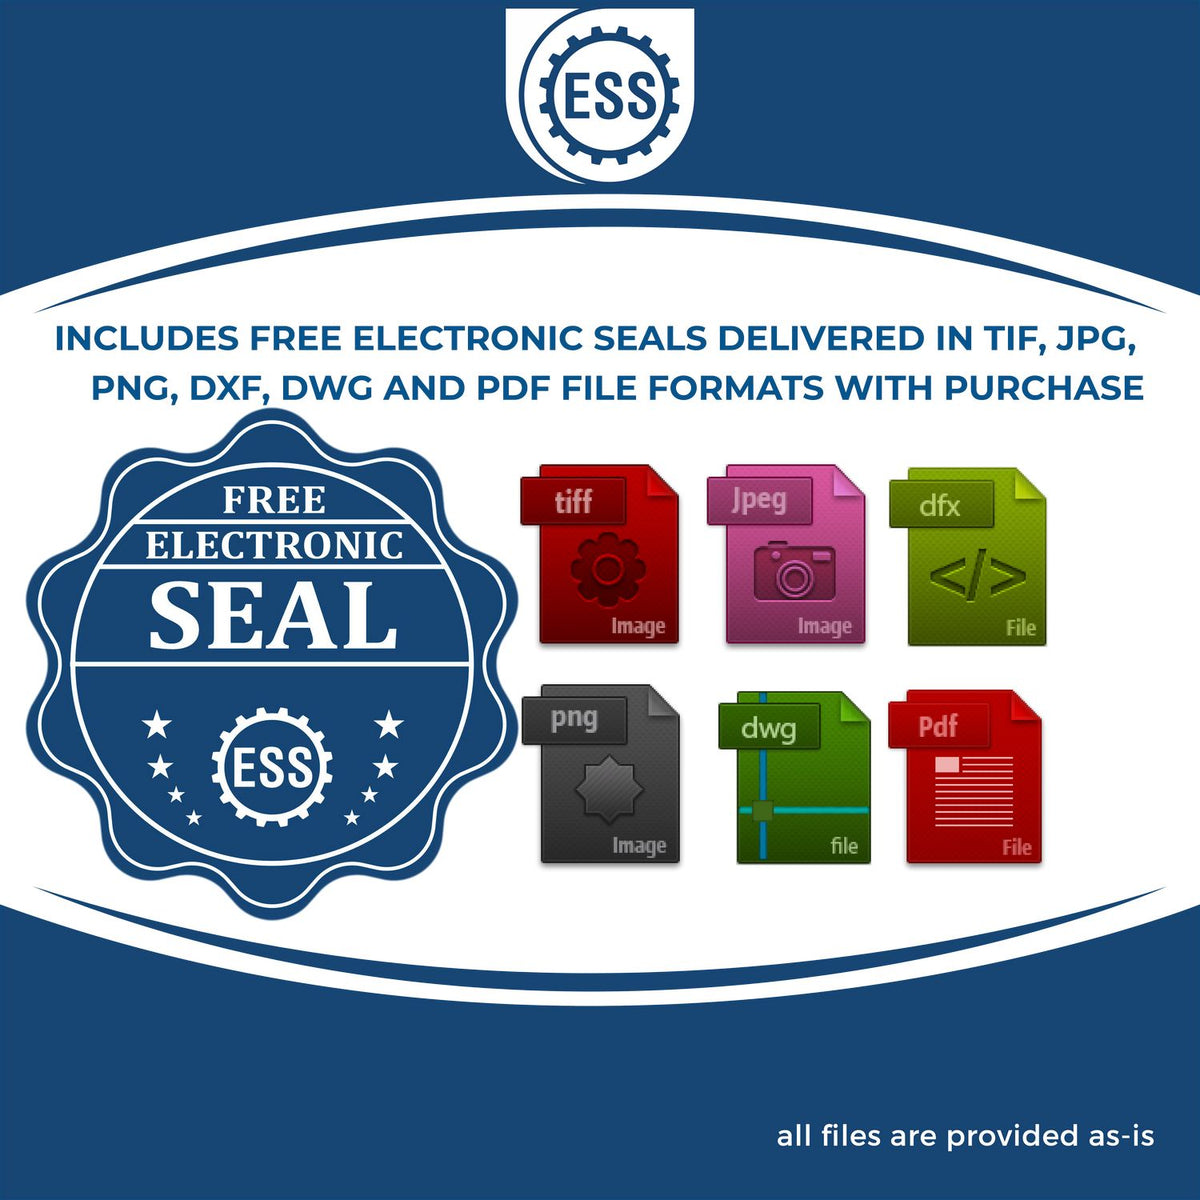 An infographic for the free electronic seal for the Hybrid Rhode Island Landscape Architect Seal illustrating the different file type icons such as DXF, DWG, TIF, JPG and PNG.